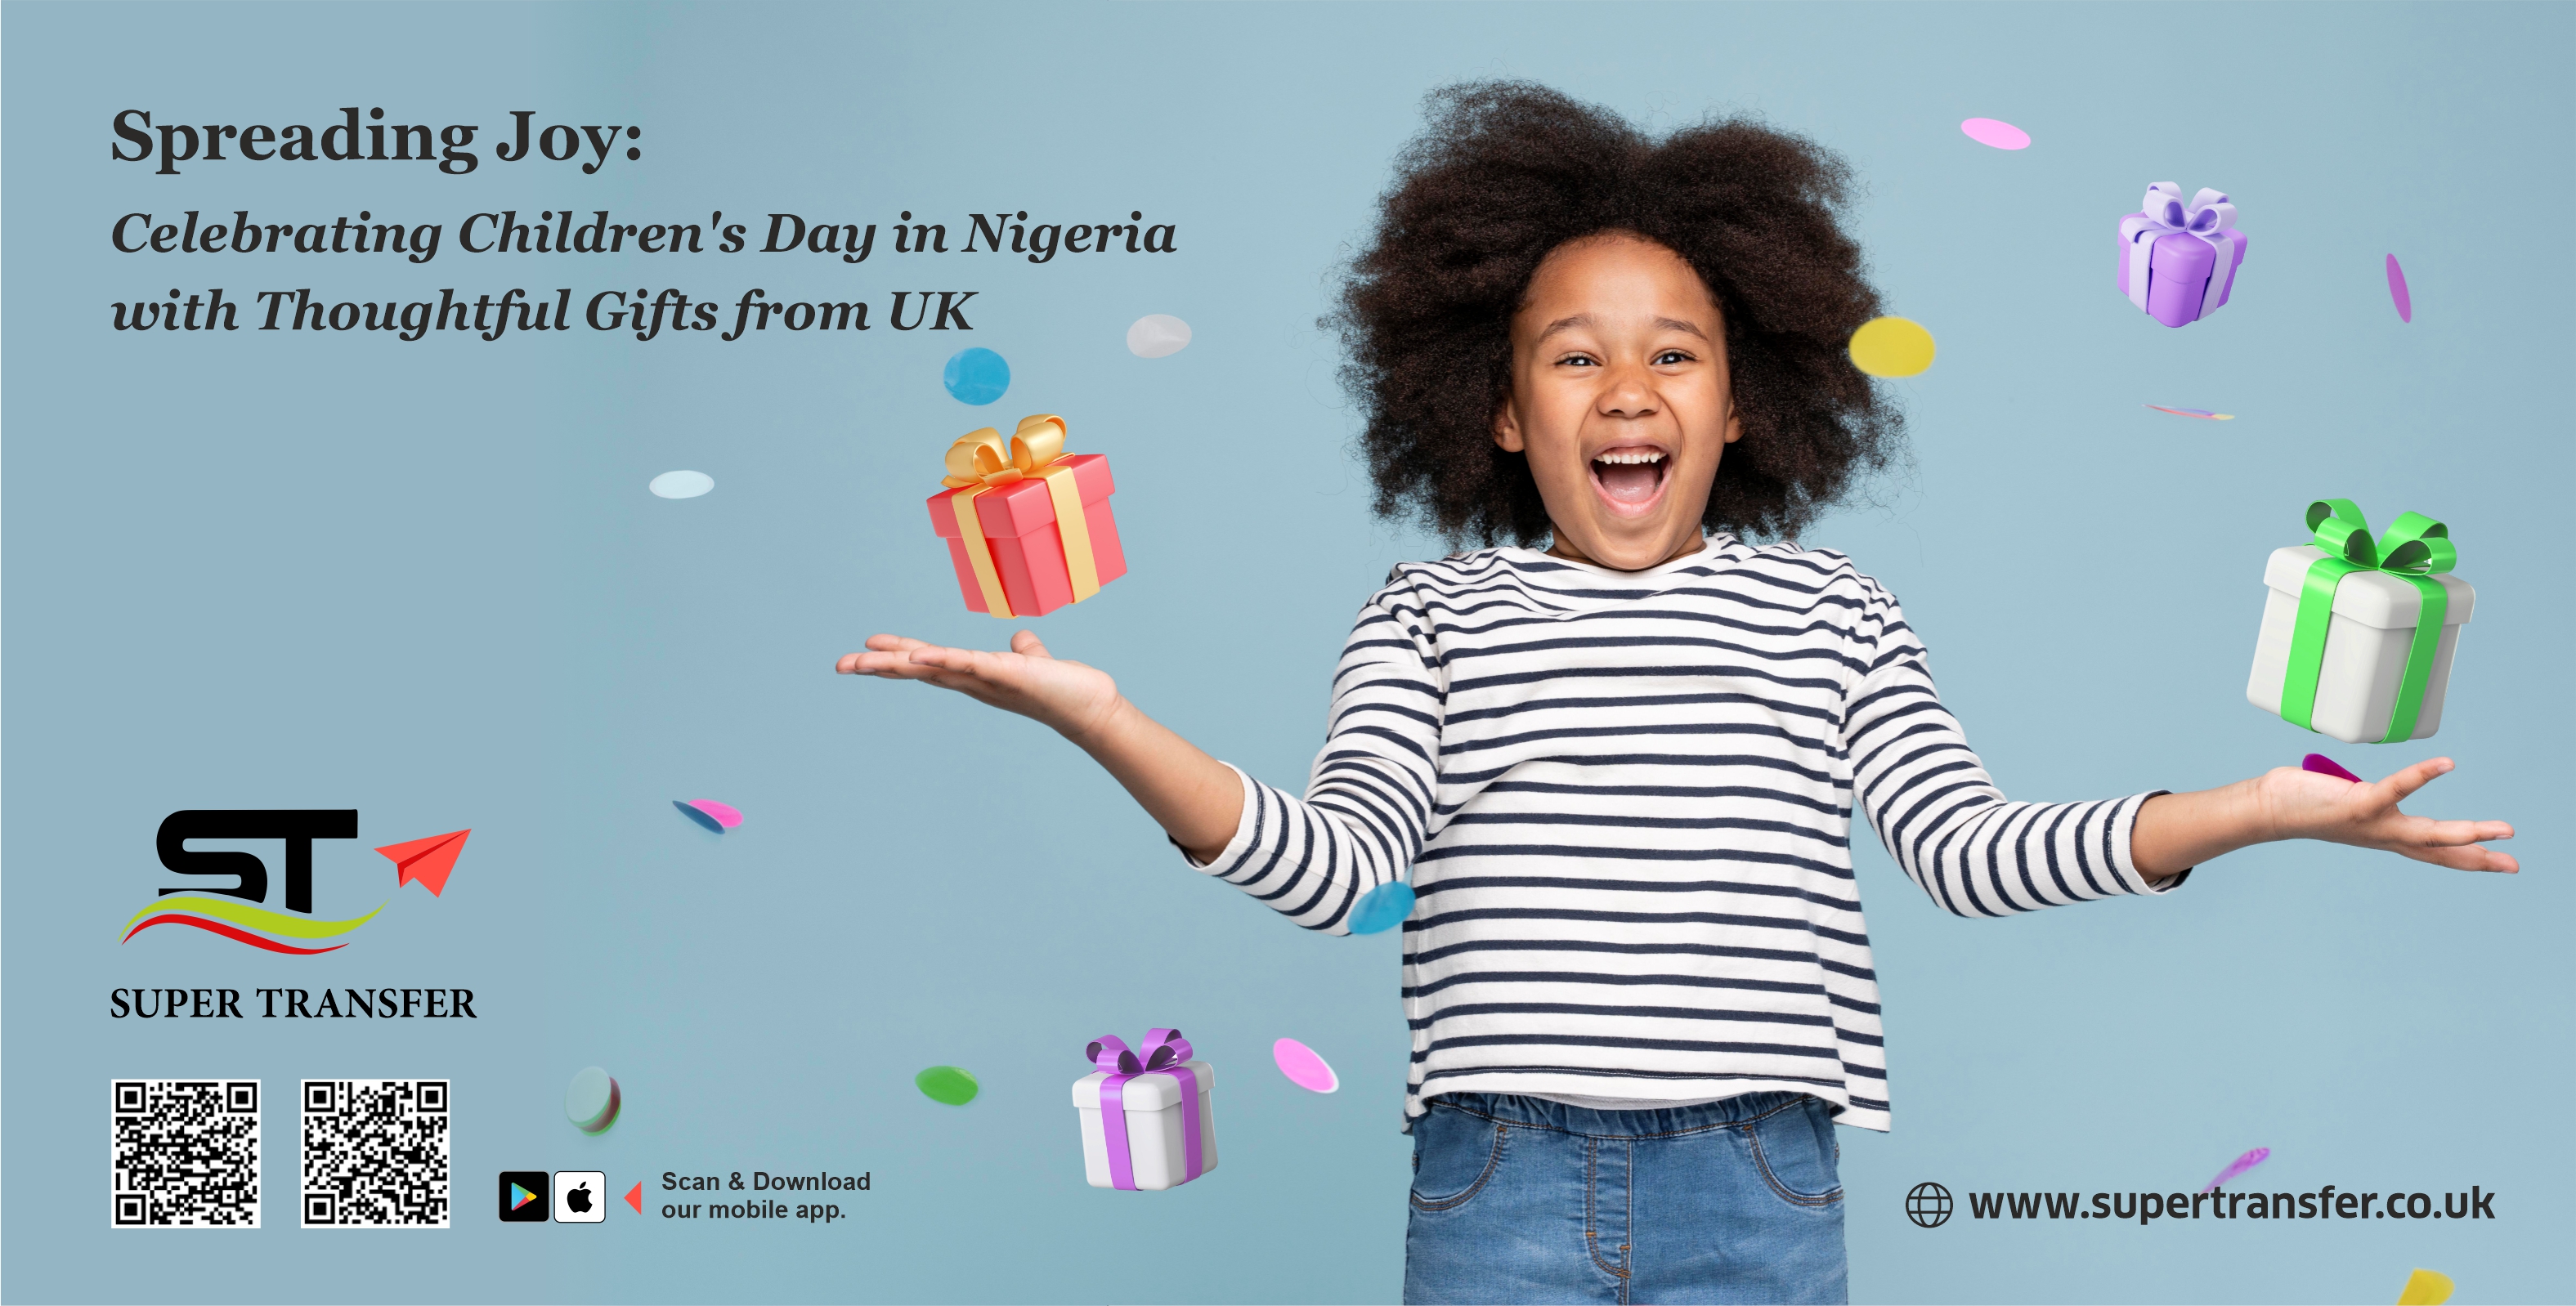 Spreading Joy: Celebrating Children's Day in Nigeria
                    with Thoughtful Gifts from UK